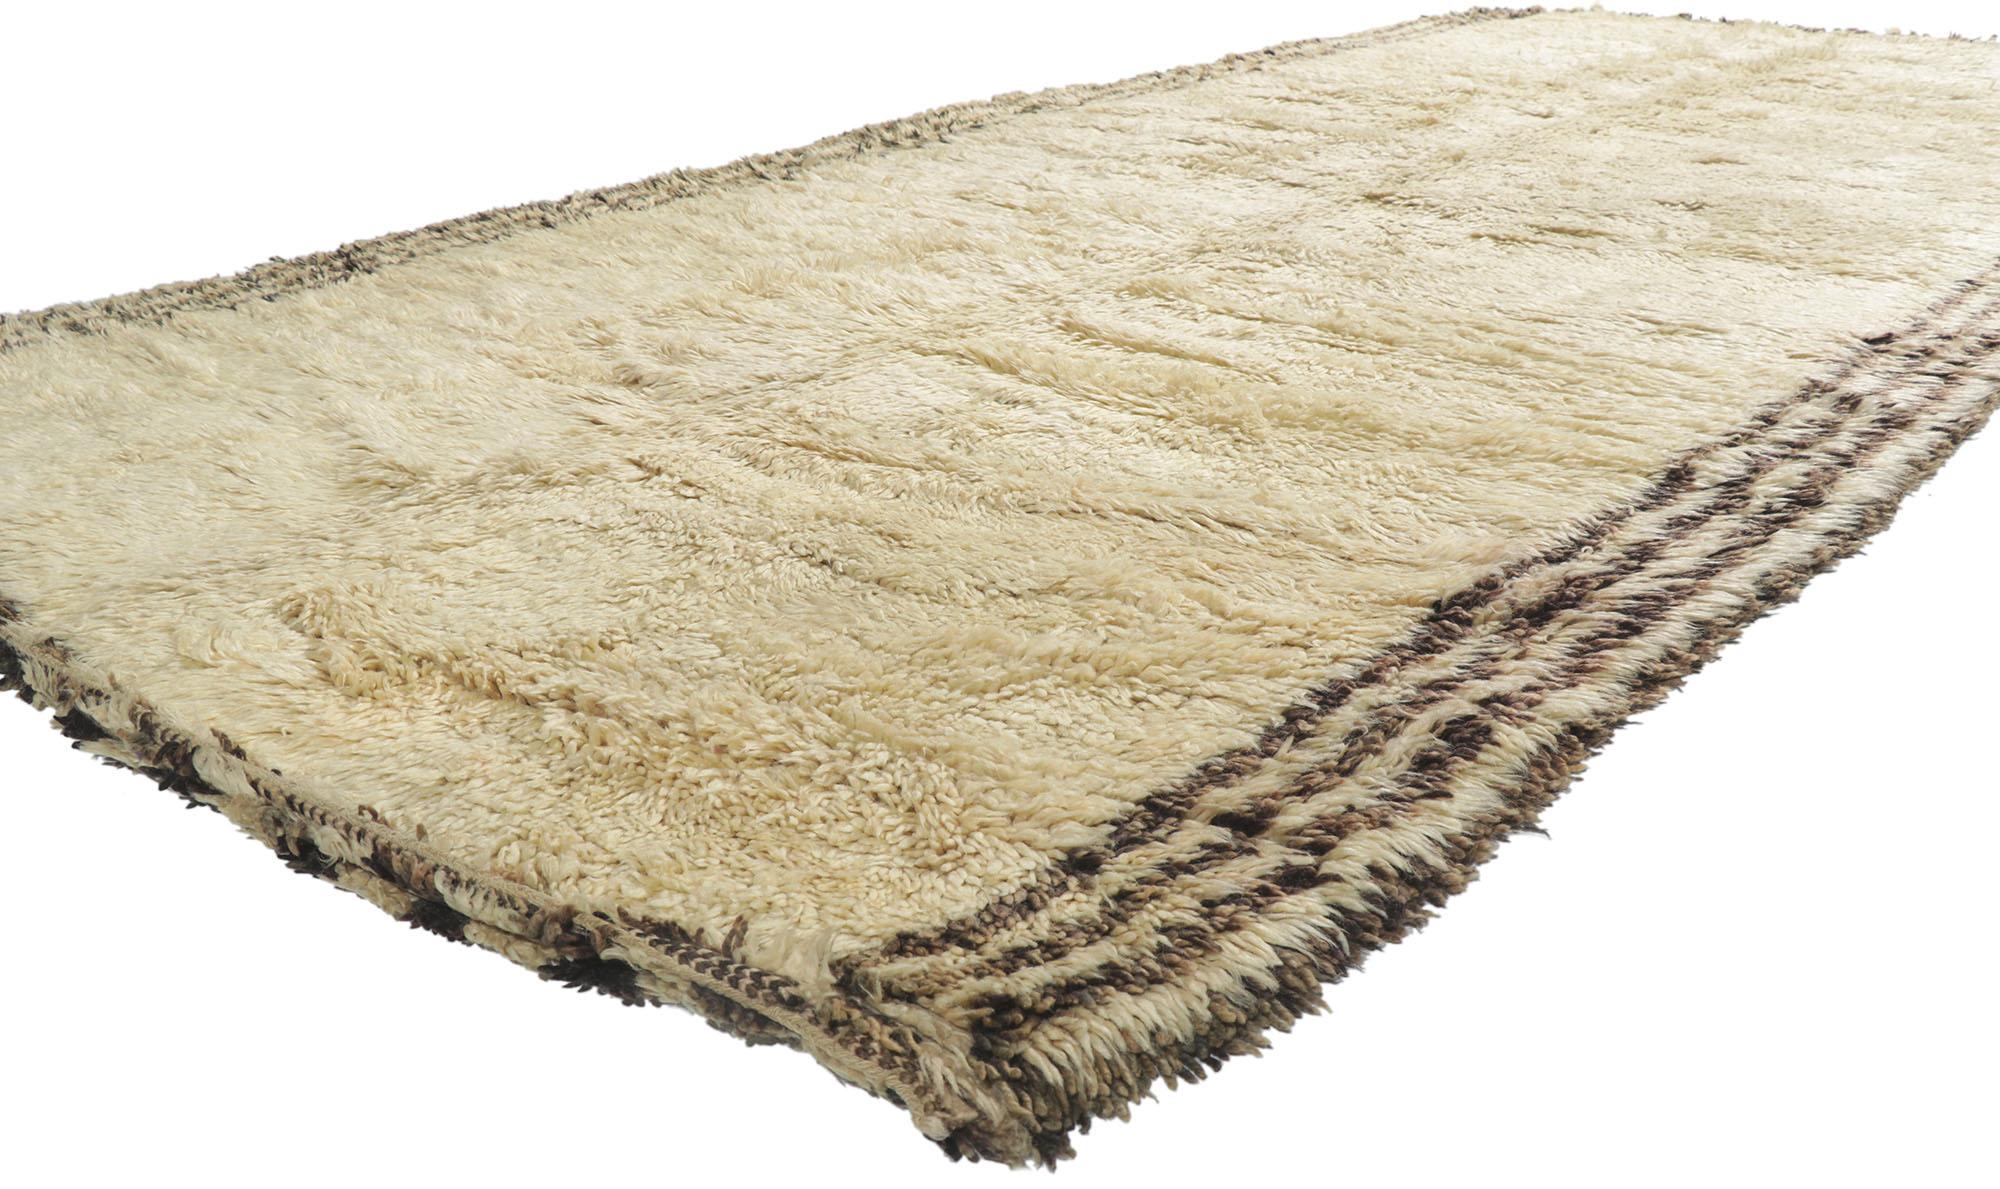 21410 vintage Berber Moroccan Beni Ourain rug 06'00 x 13'02. With its simplicity, plush pile, incredible detail and texture, this hand knotted wool vintage Beni Ourain Moroccan rug is a captivating vision of woven beauty. Imbued with beige hues, the